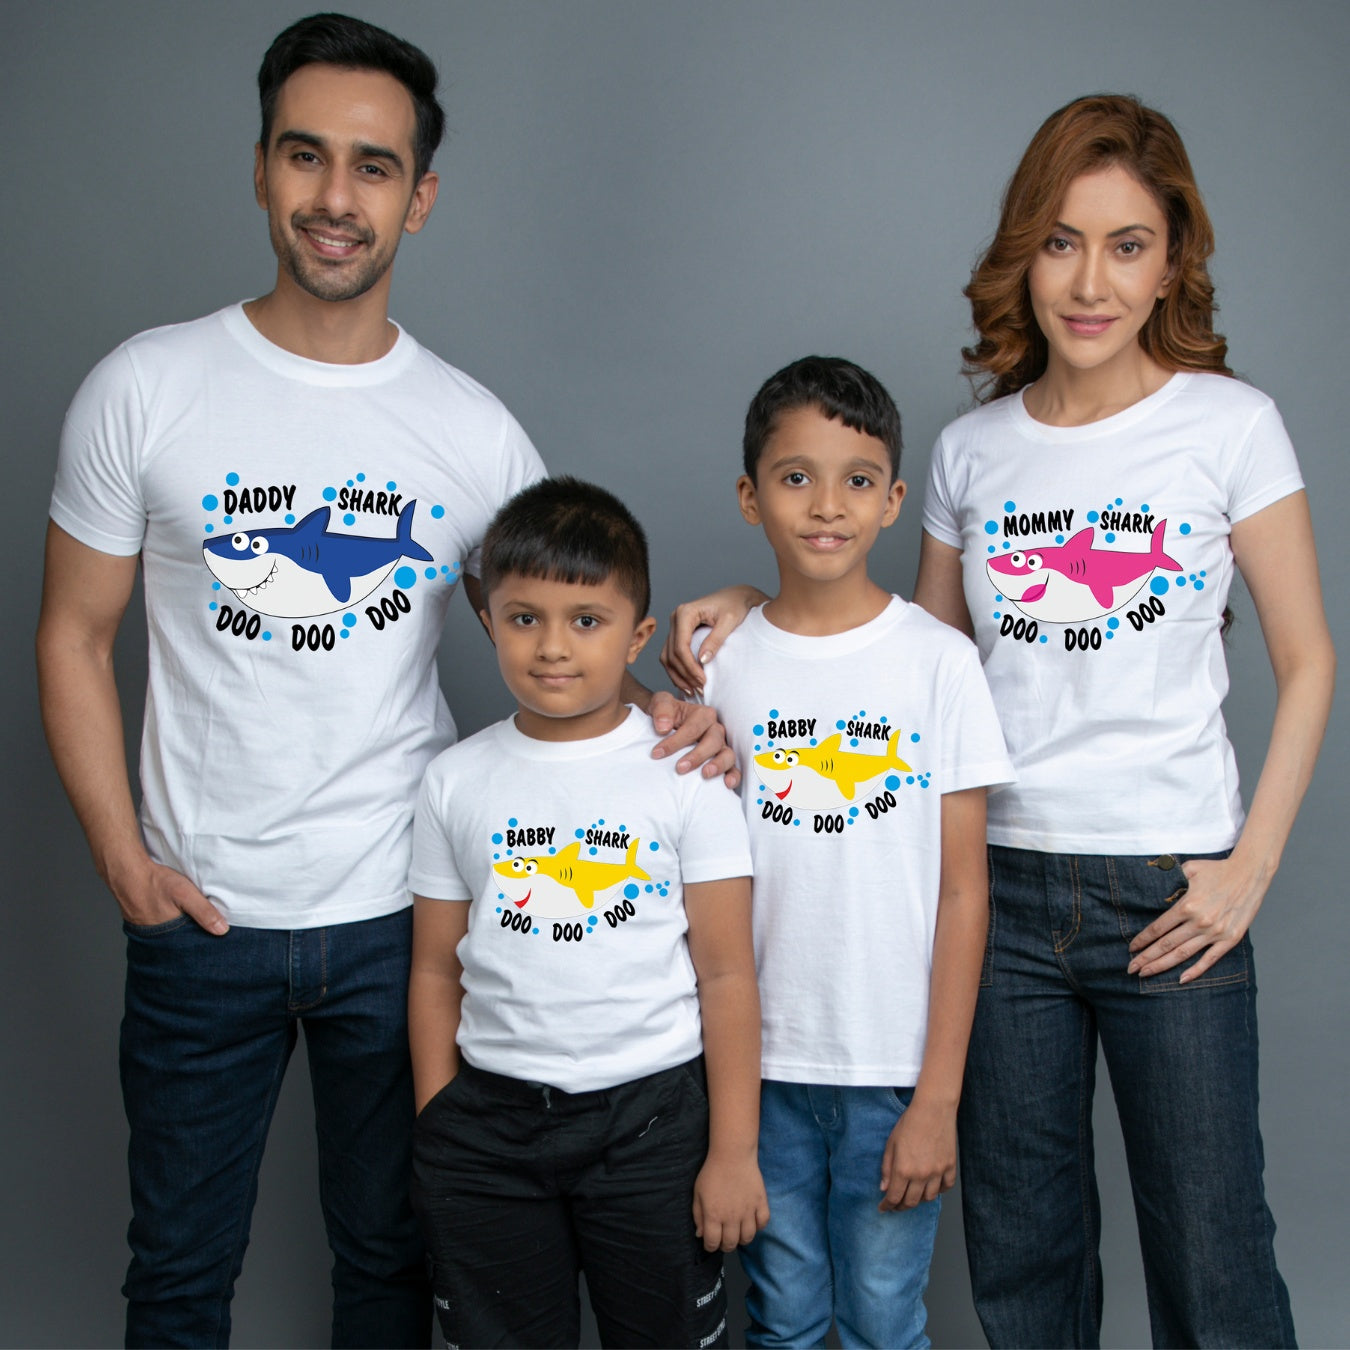 Family t shirts set of 4 Mom Dad Two Sons in White Colour - Shark Family